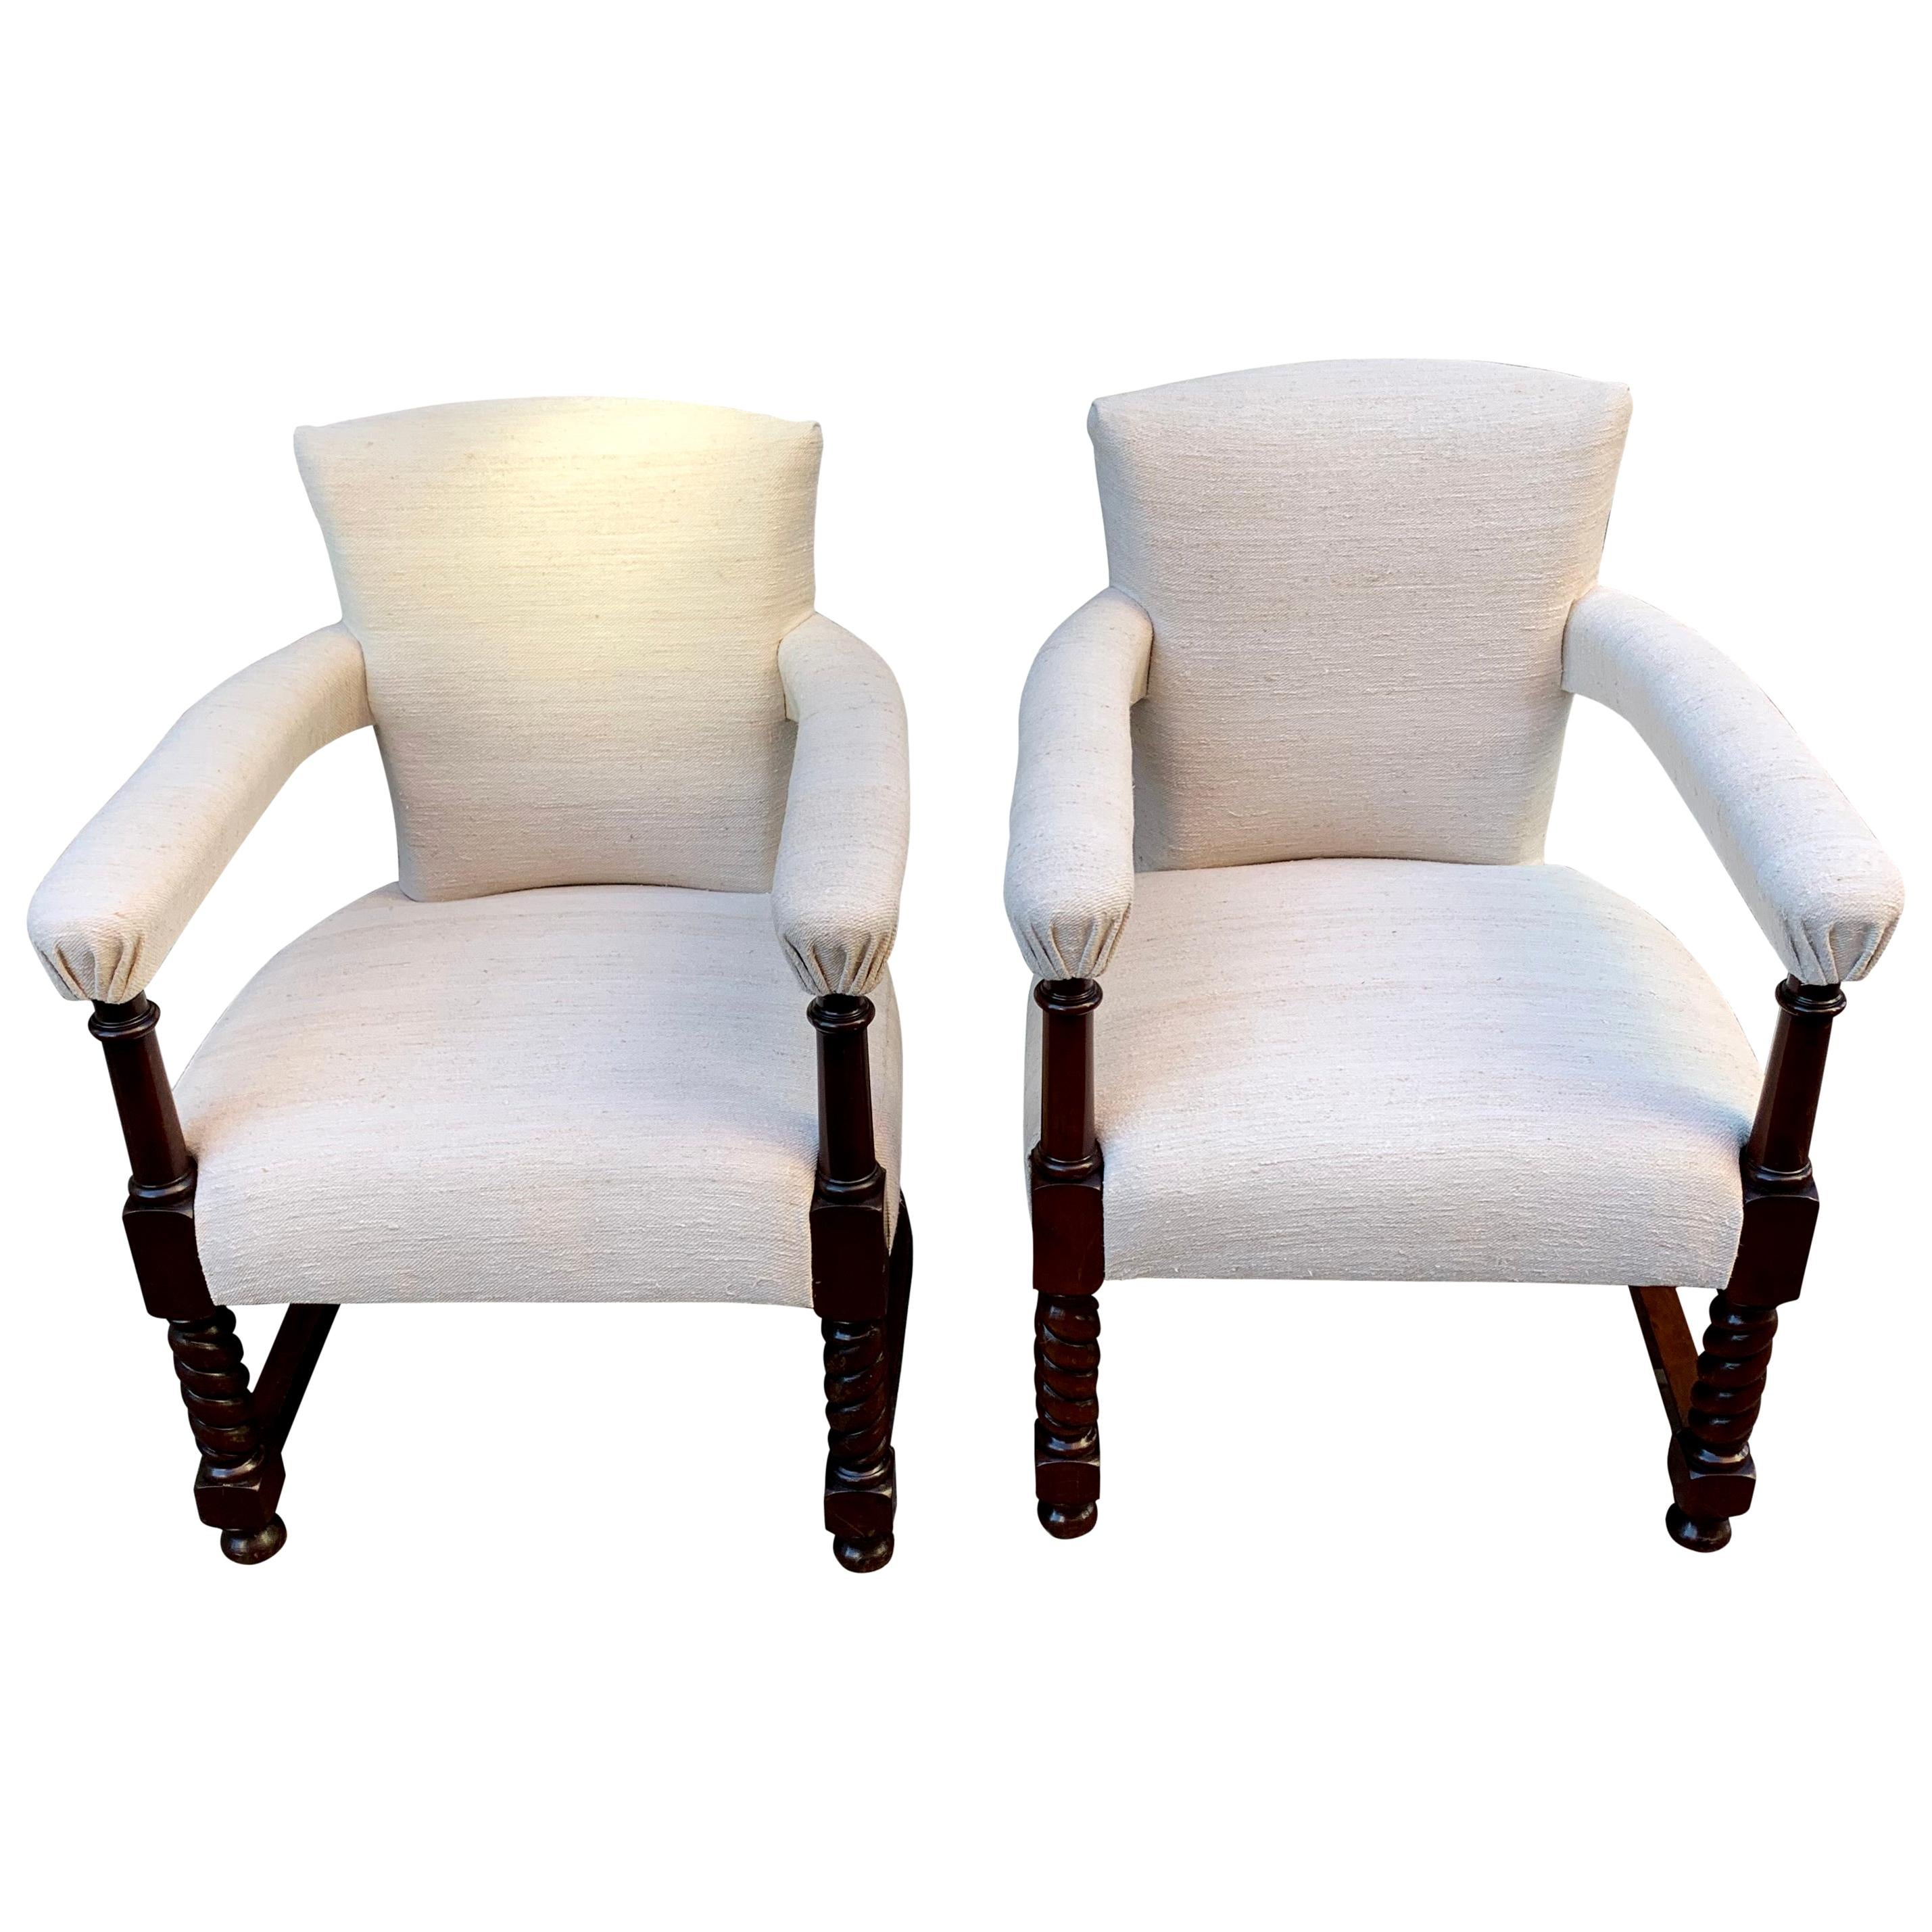 Pair of Upholstered Vintage Belgian Linen Club Chairs, Scotland, 19th Century